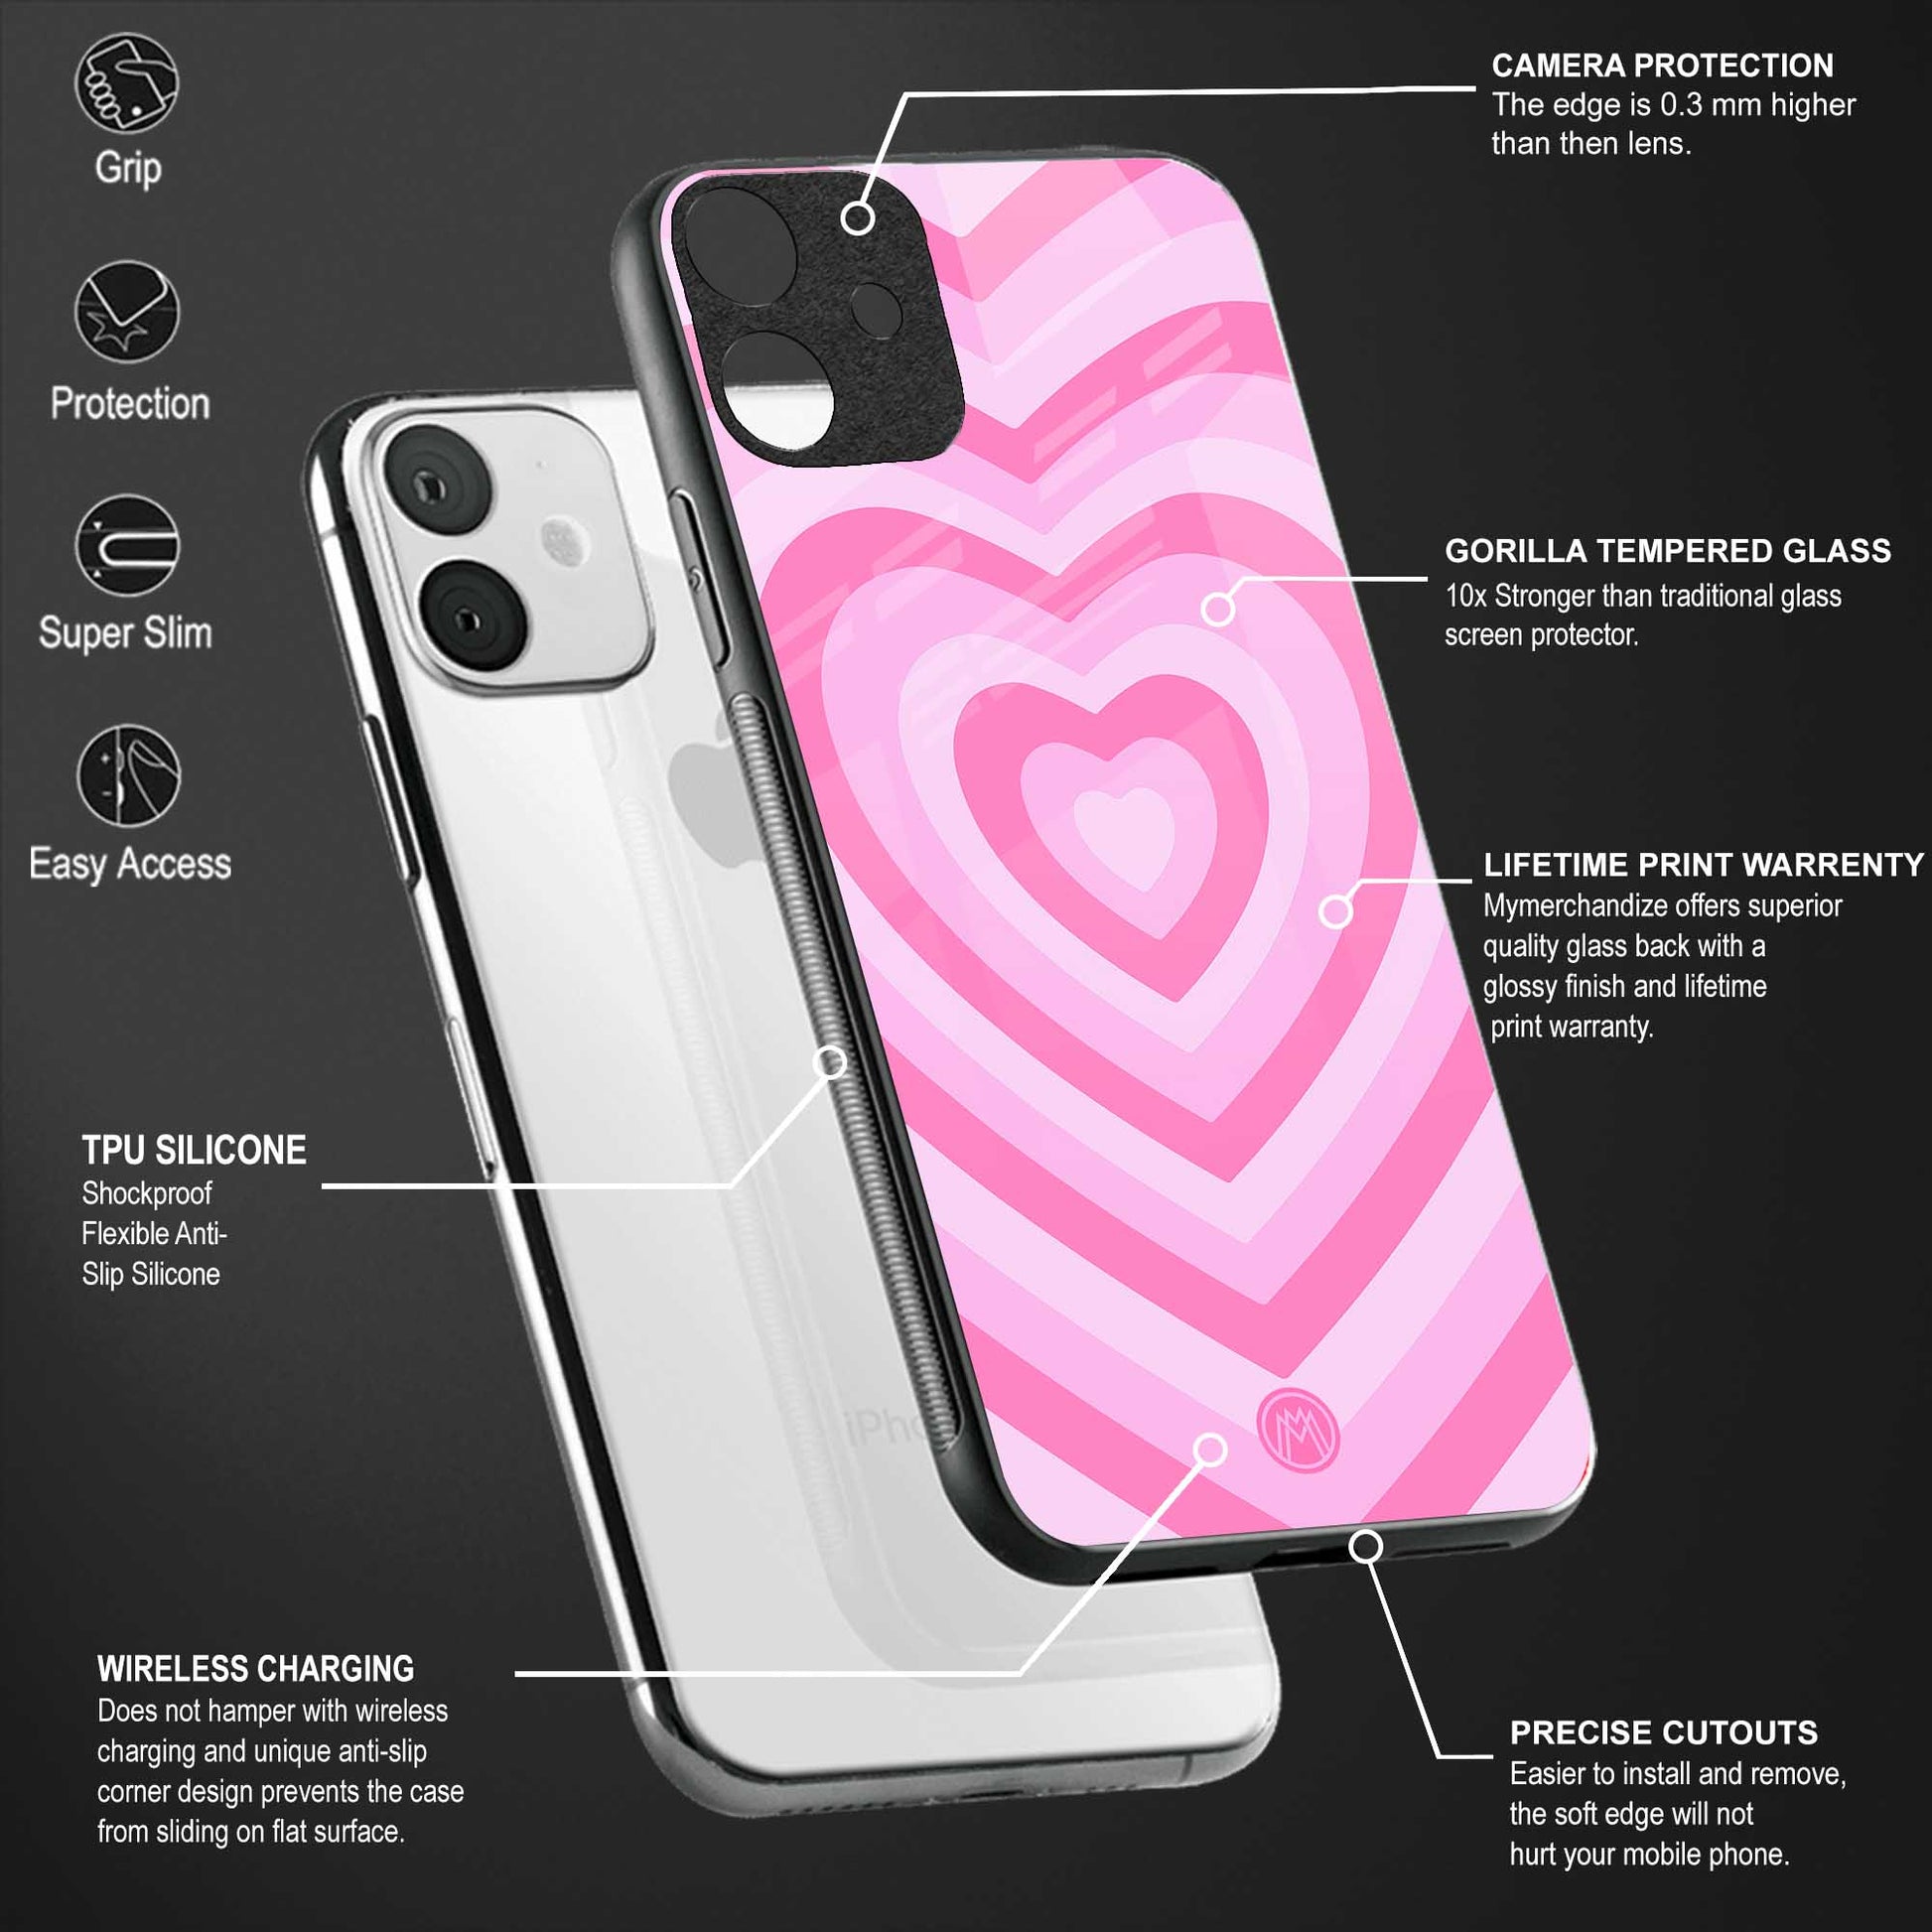 y2k pink hearts aesthetic back phone cover | glass case for vivo y73